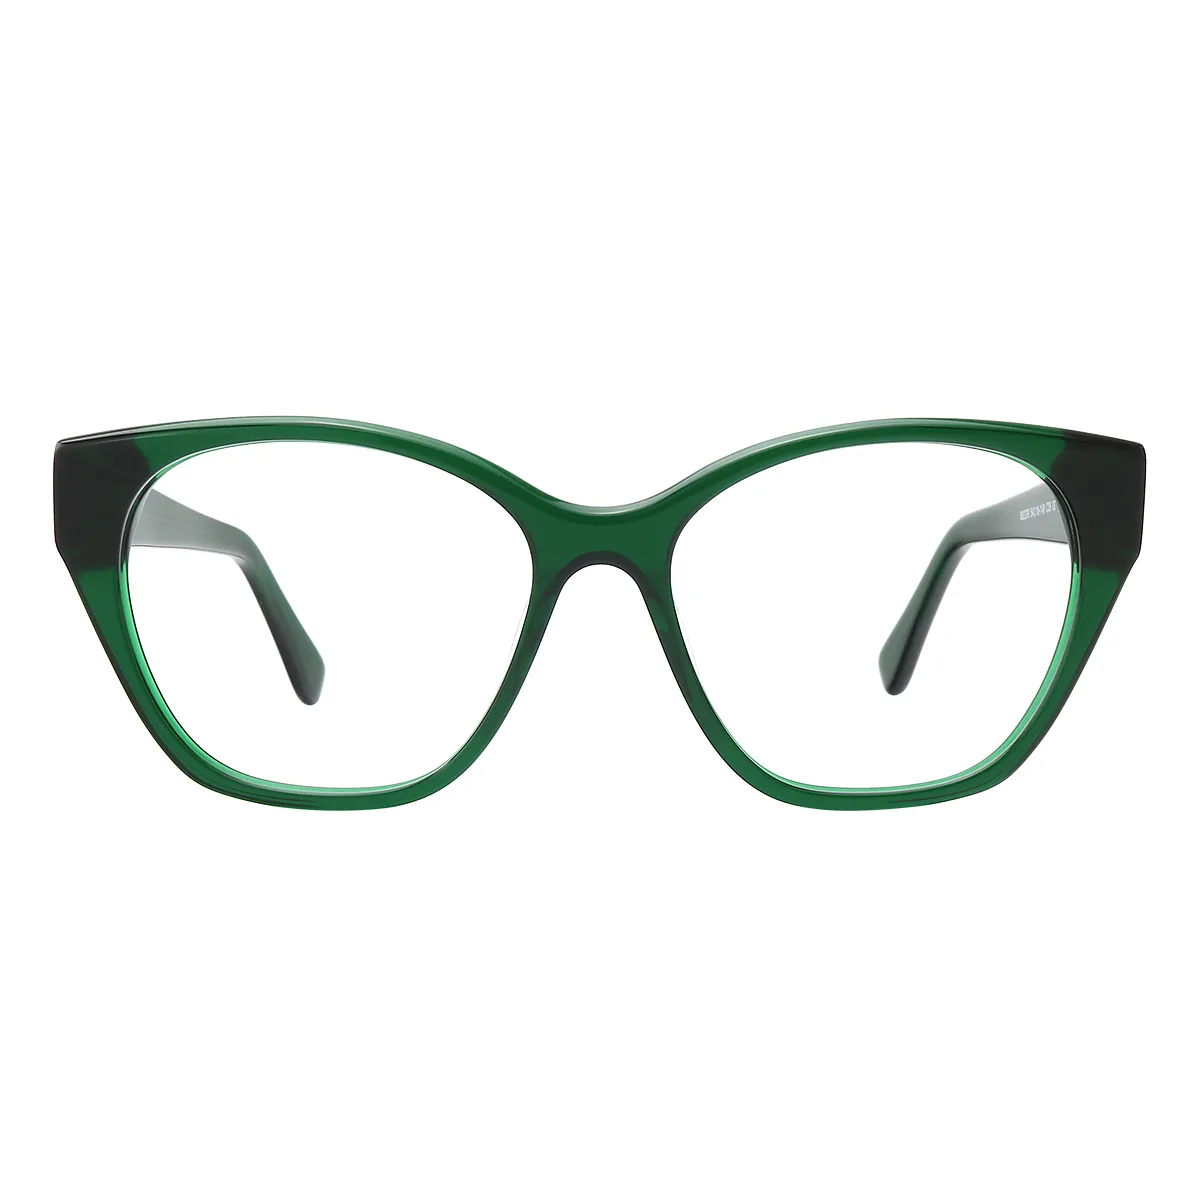 Surrey - Oval Transparent-Green Glasses for Women